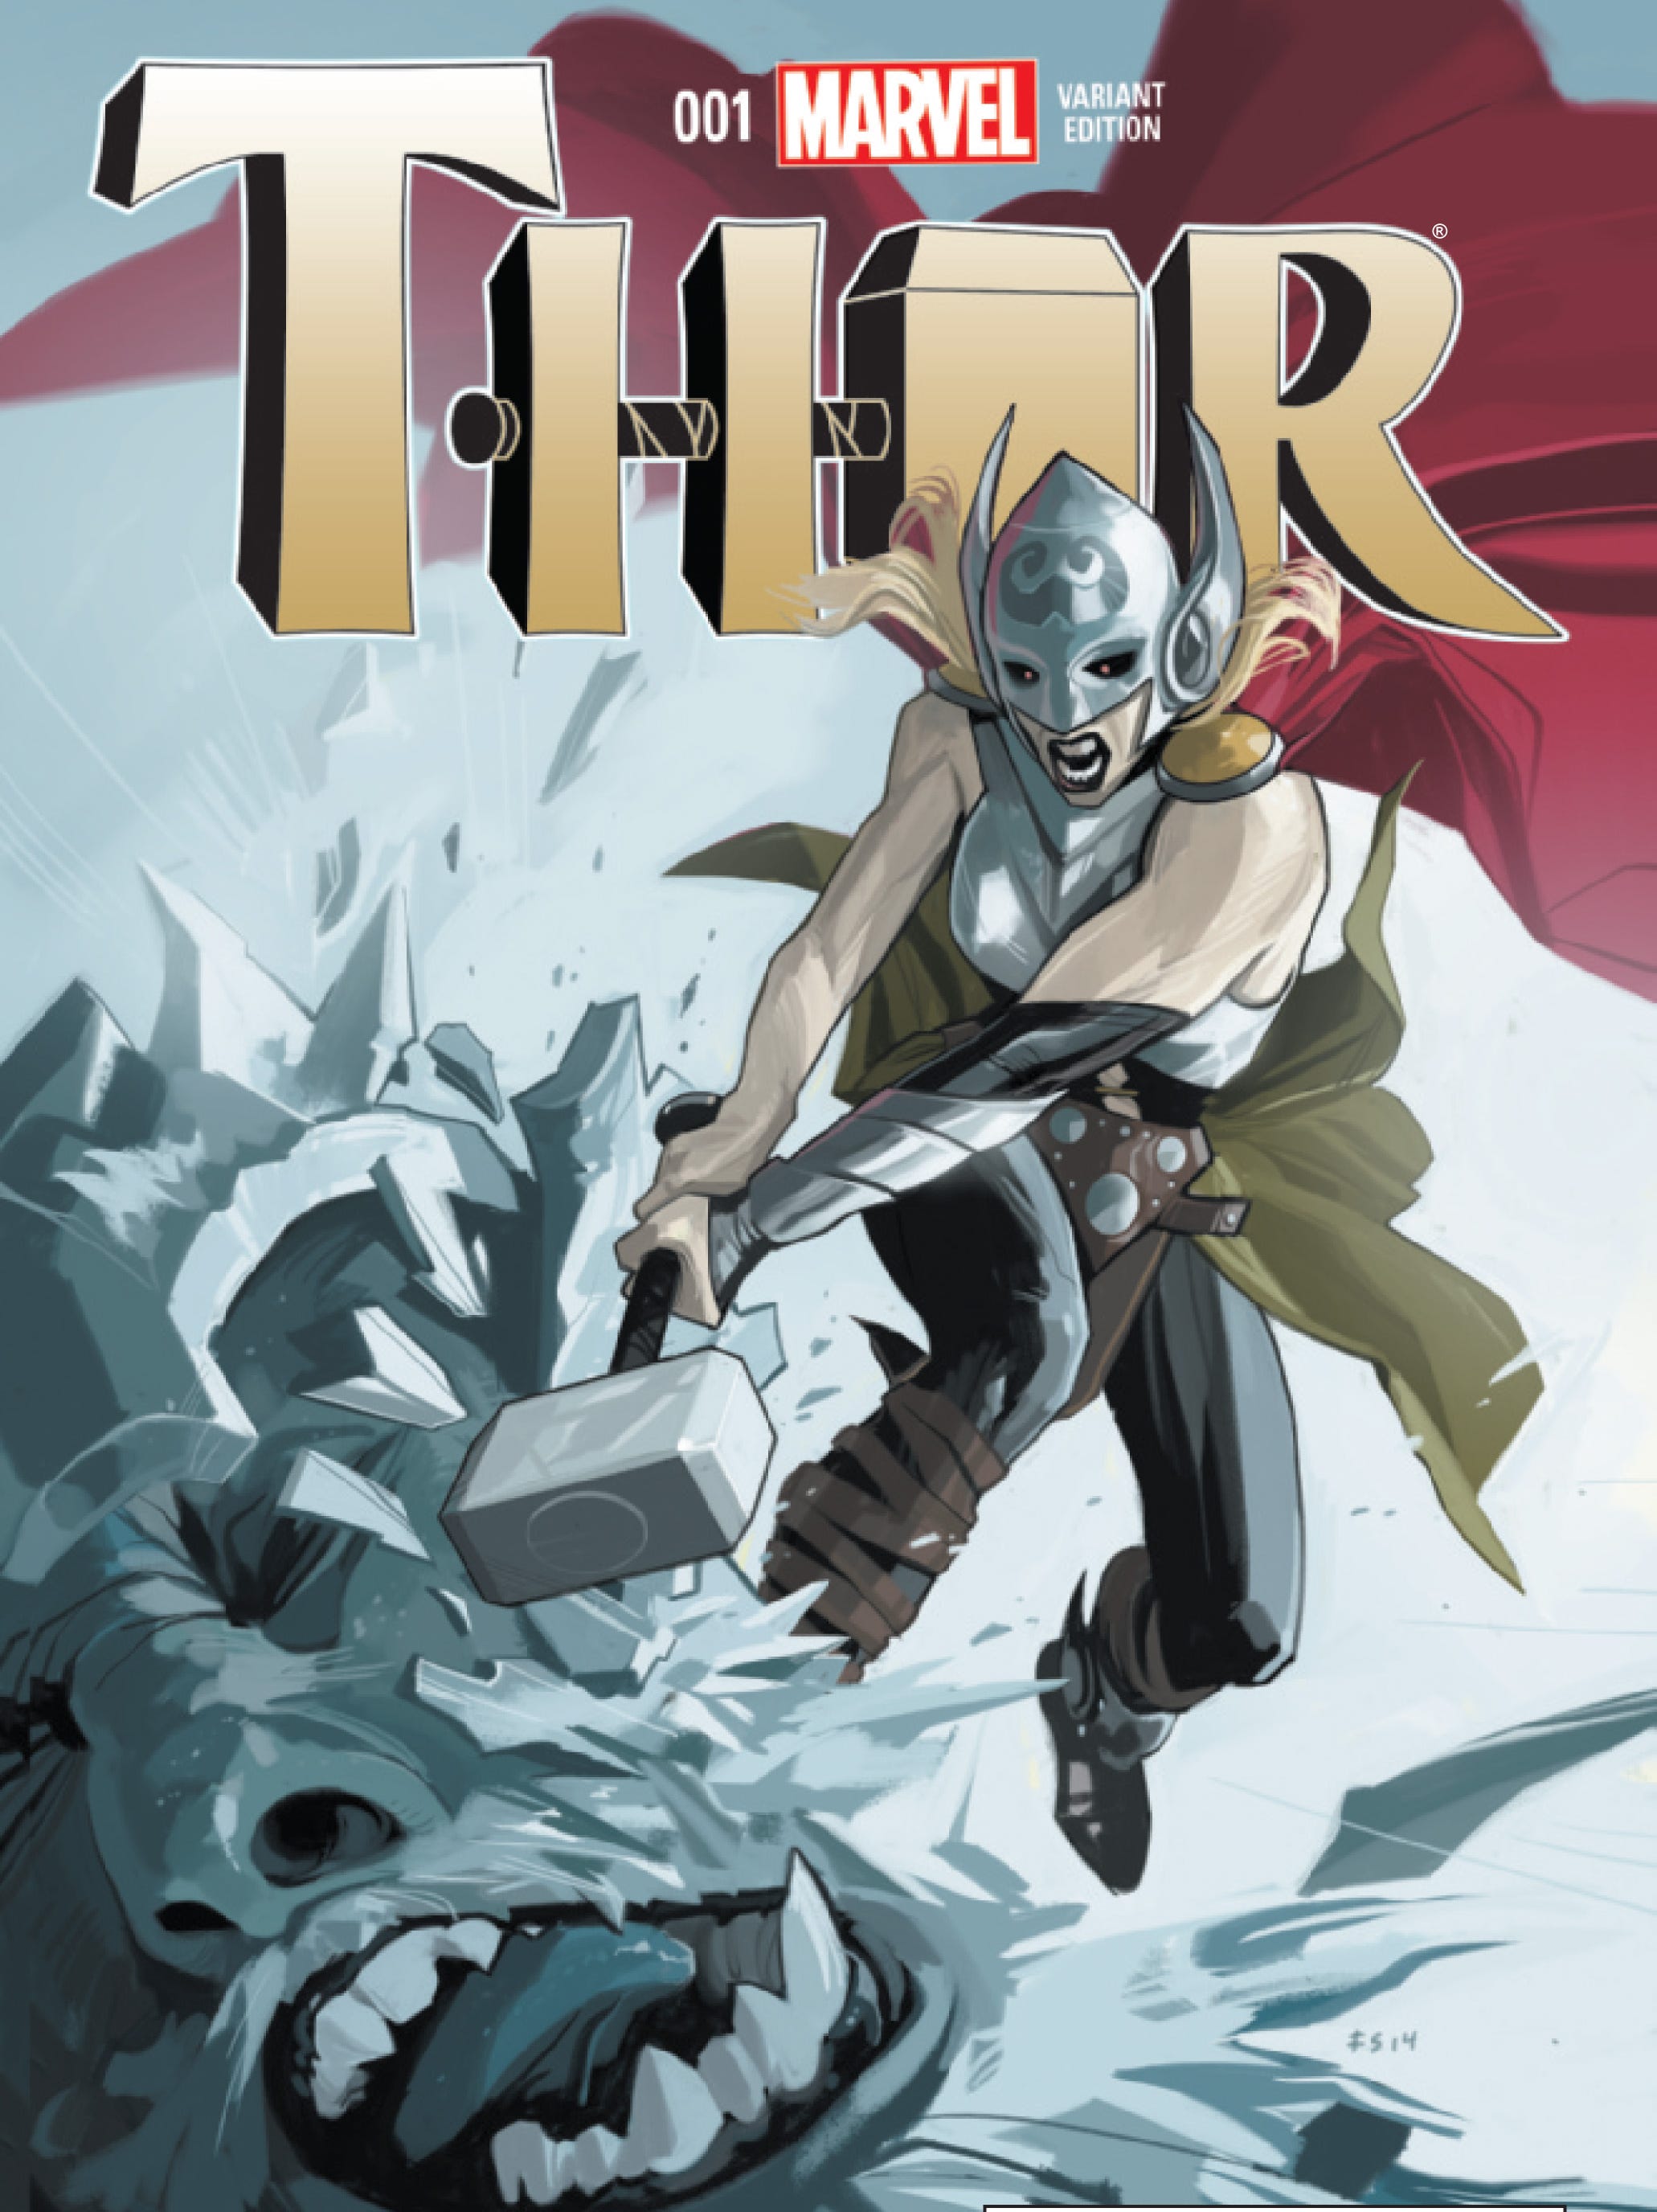 It's hammer time for a new female Thor